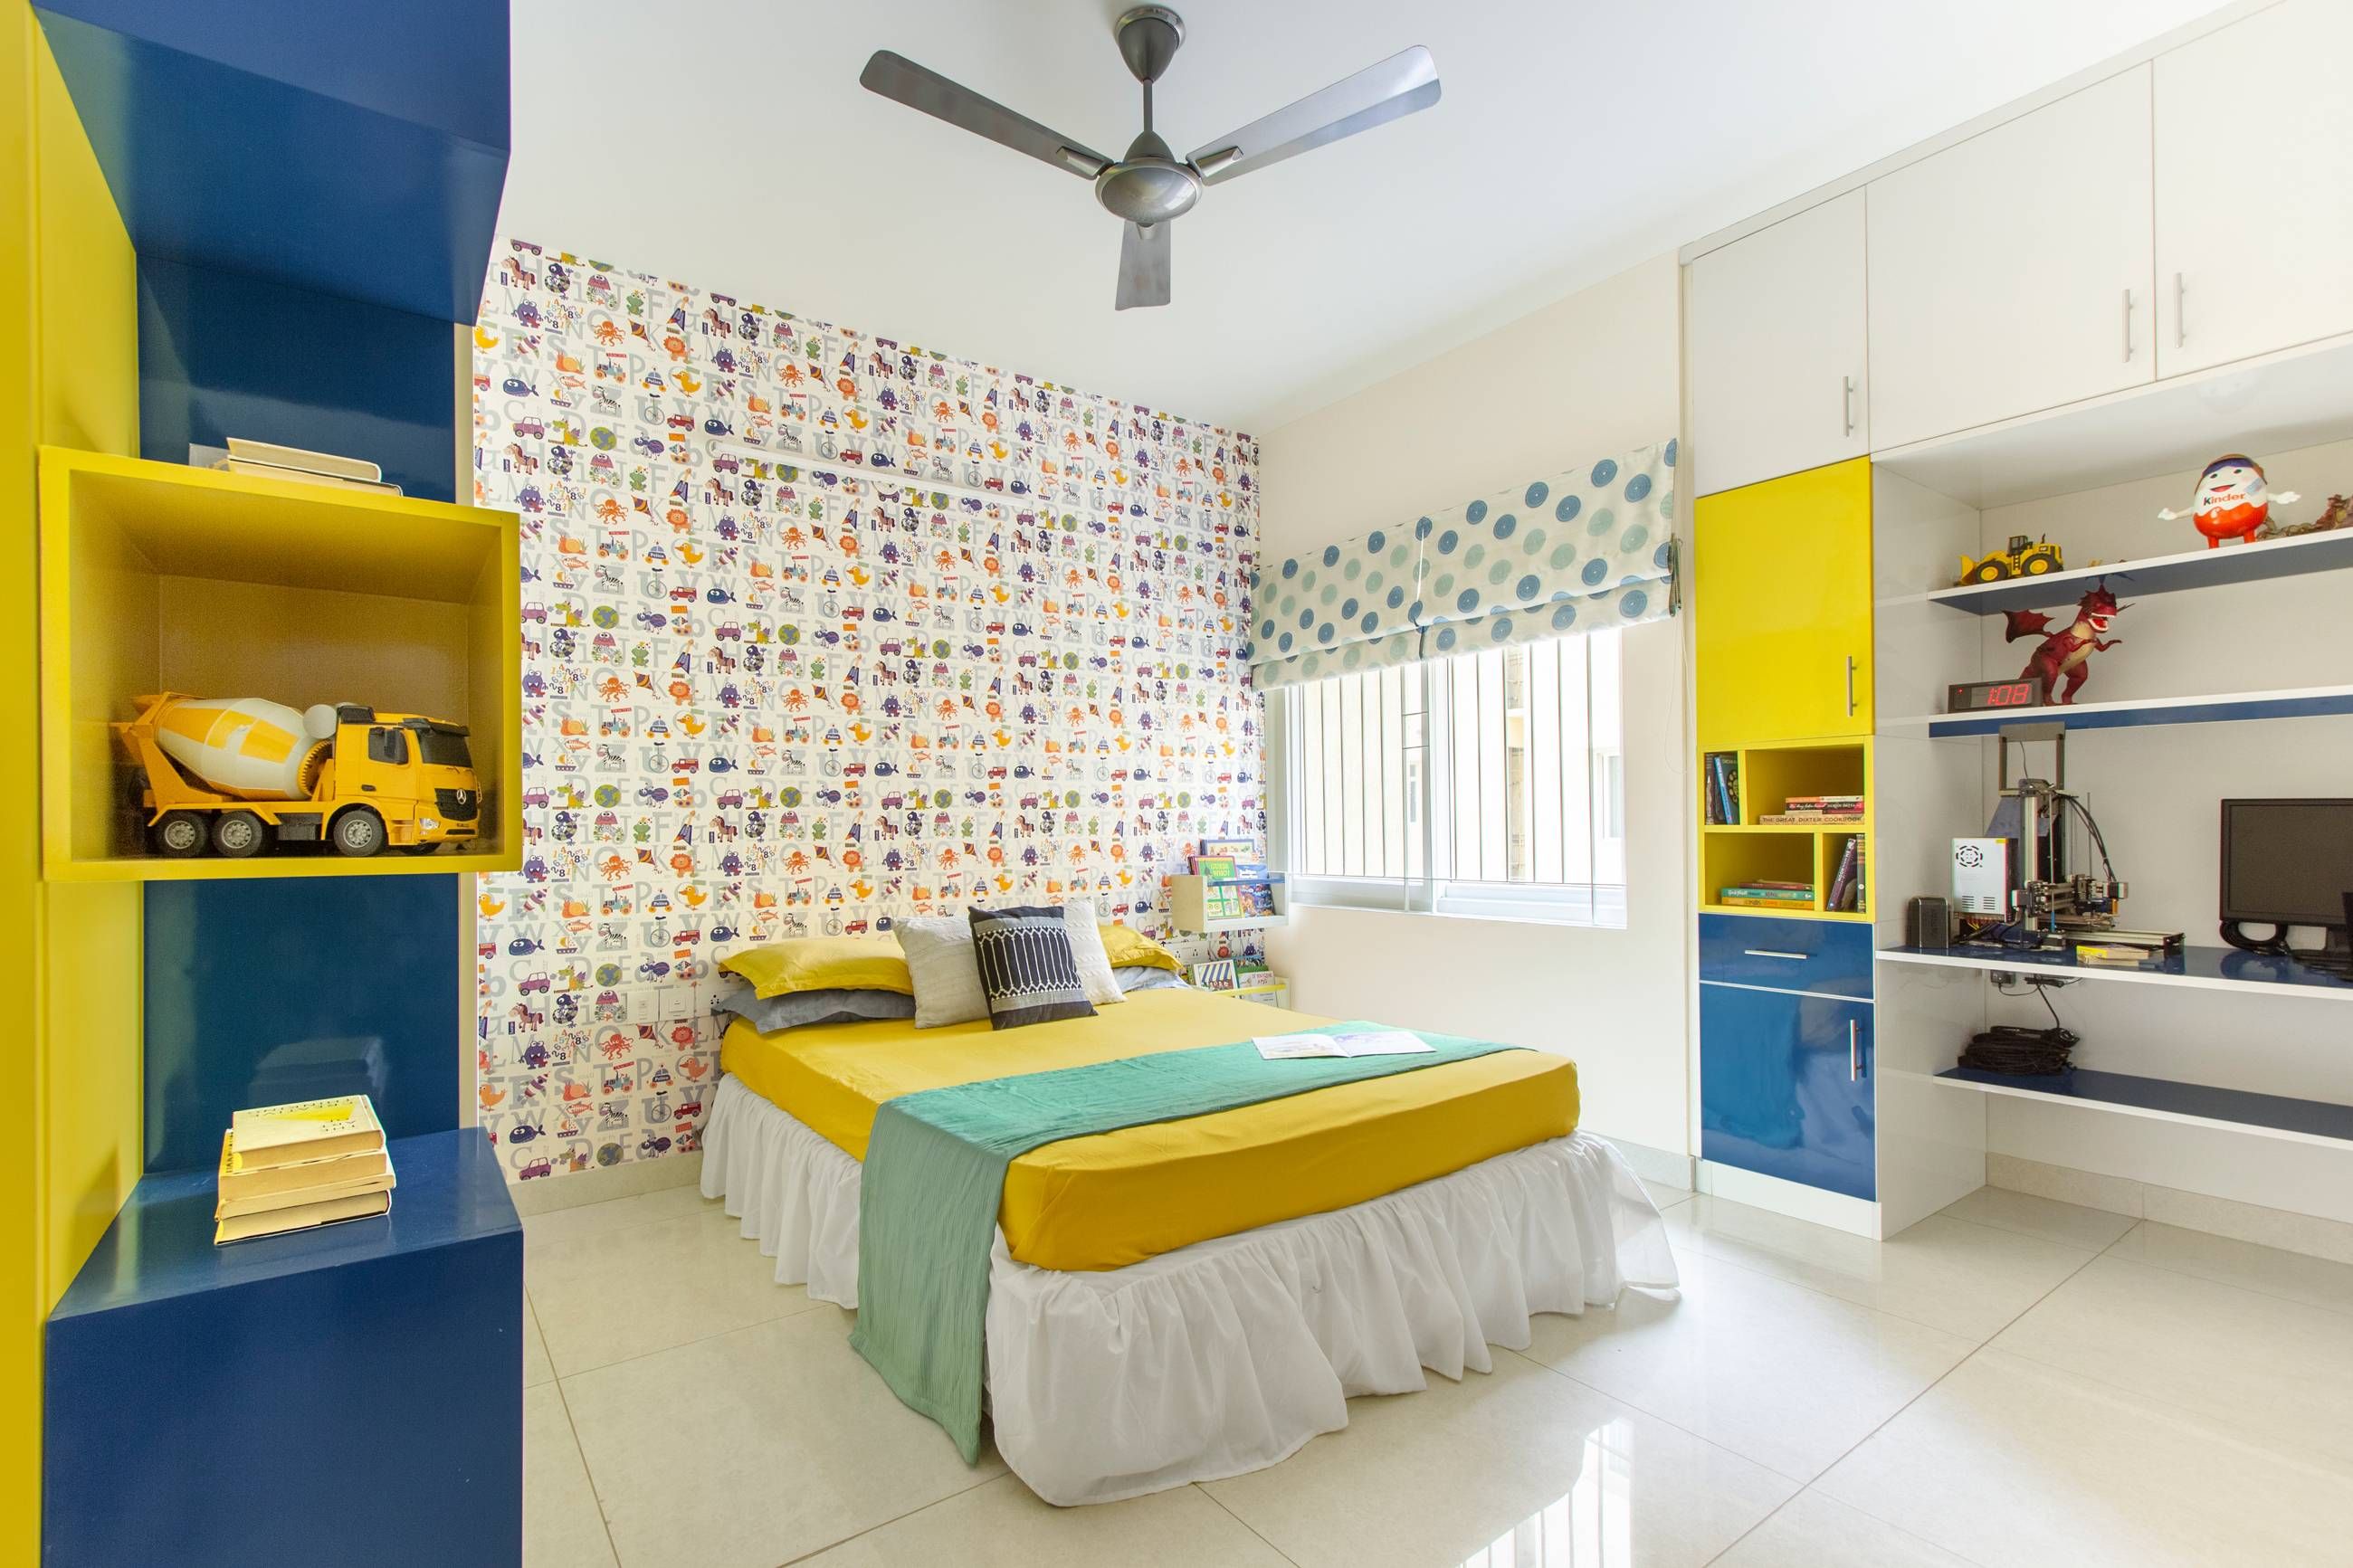 Modern Kids Bedroom Design With Colourful Wallpaper And Glossy White Flooring